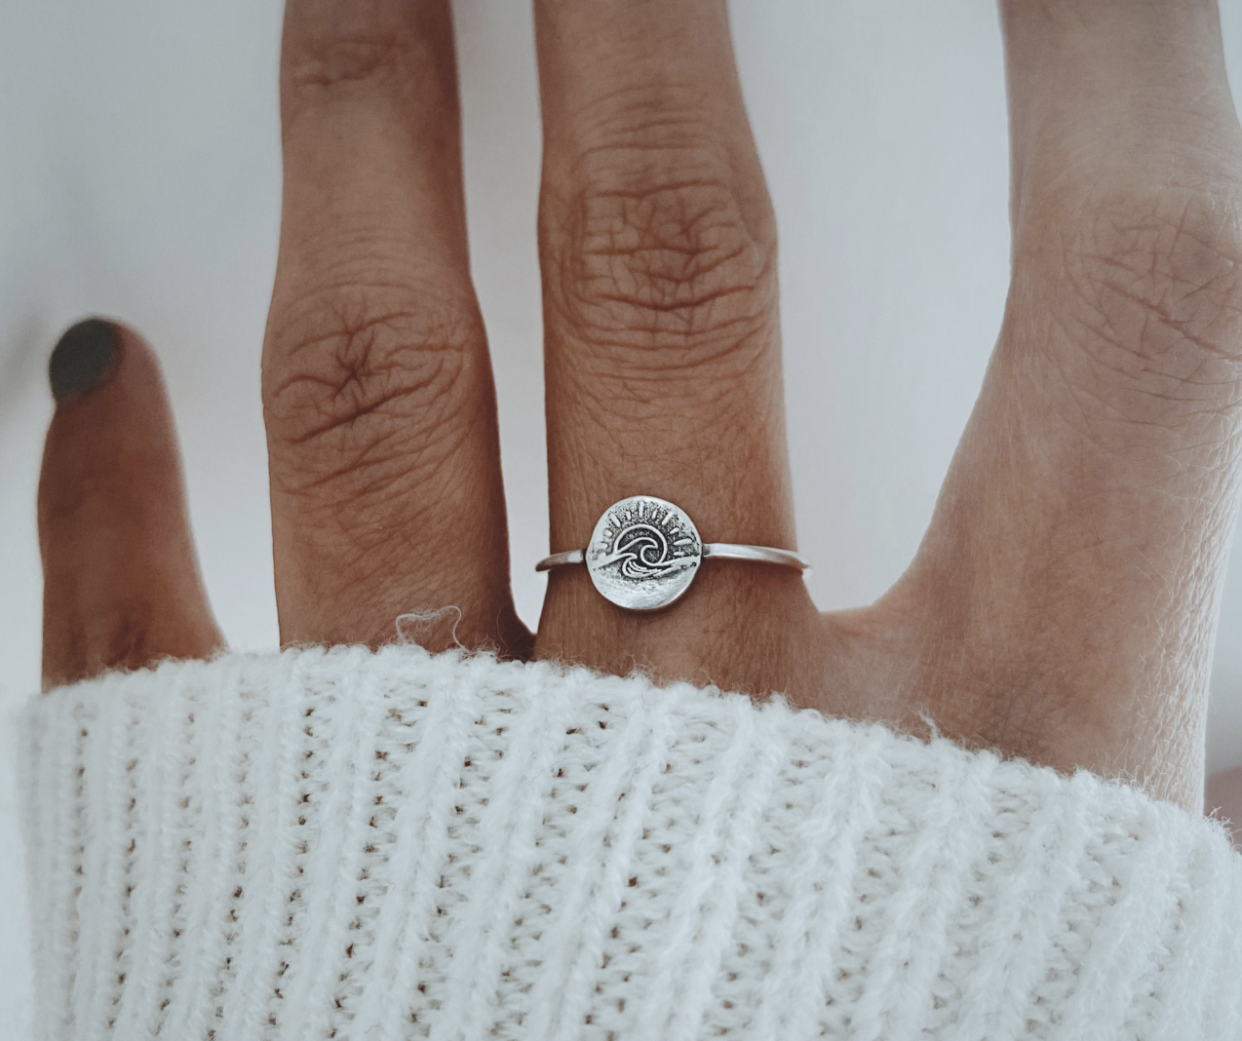 Dainty Wave and Sun Ring Simple Wave Ring Silver Ocean Ring image 0 Dainty Wave and Sun Ring Simple Wave Ring Silver Ocean Ring image 1 Dainty Wave and Sun Ring Simple Wave Ring Silver Ocean Ring image 2 Dainty Wave and Sun Ring Simple Wave Ring Silver